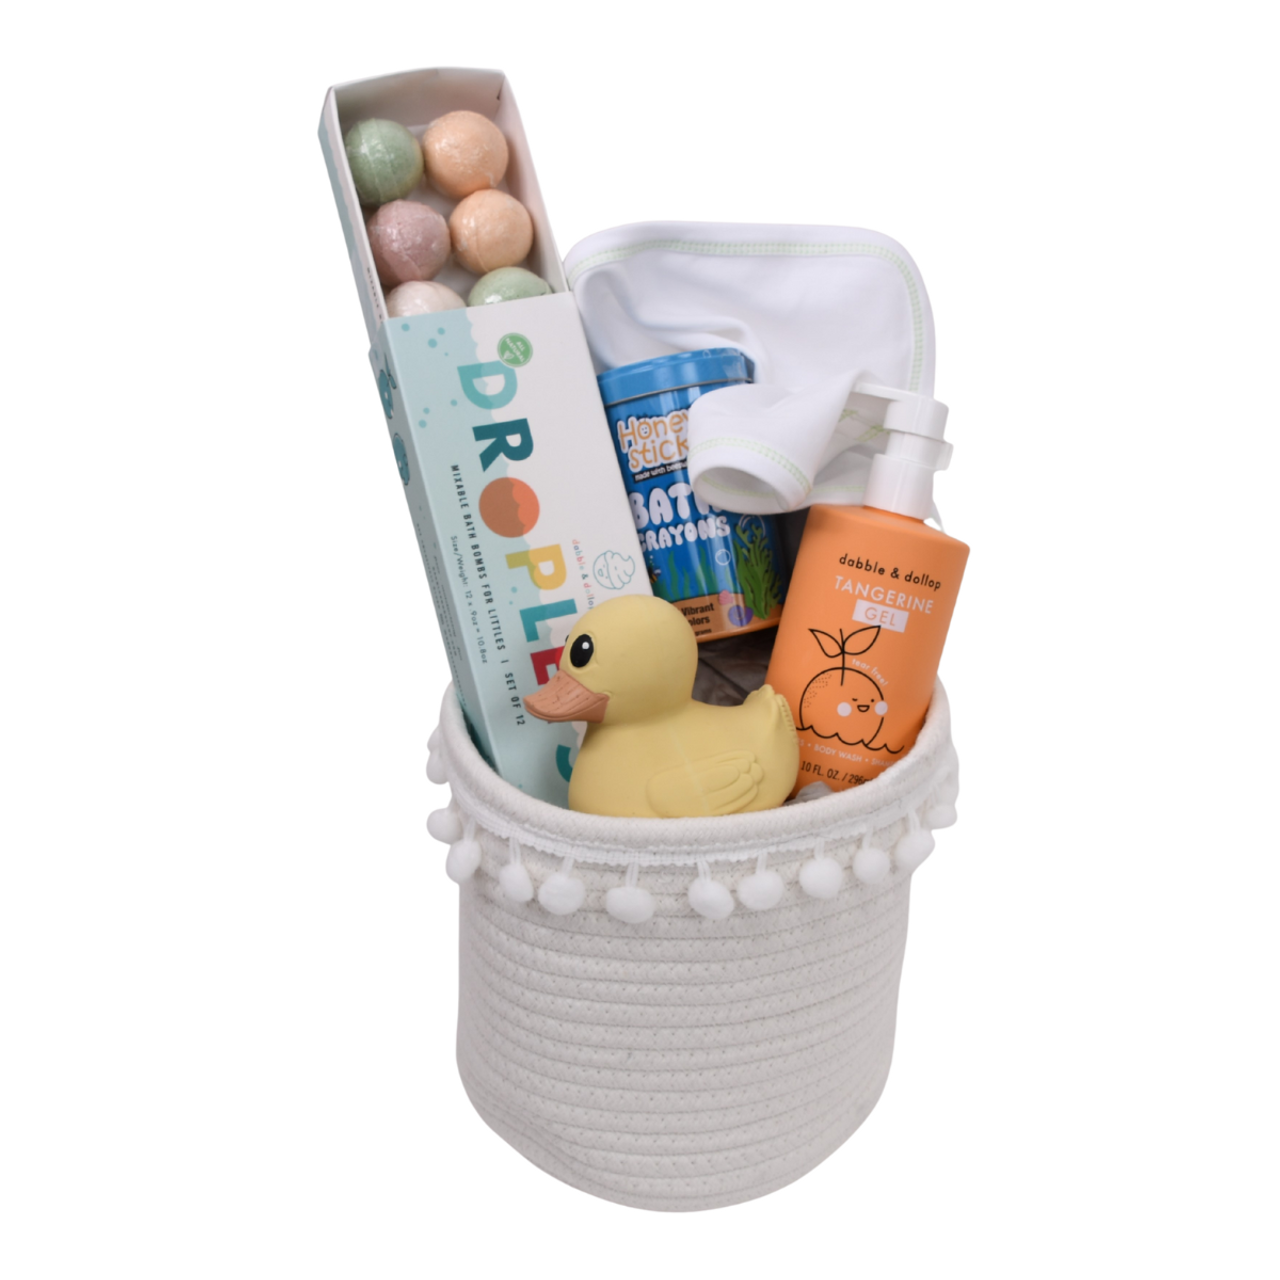 Bath Gift Basket for Kids - You're the Bomb